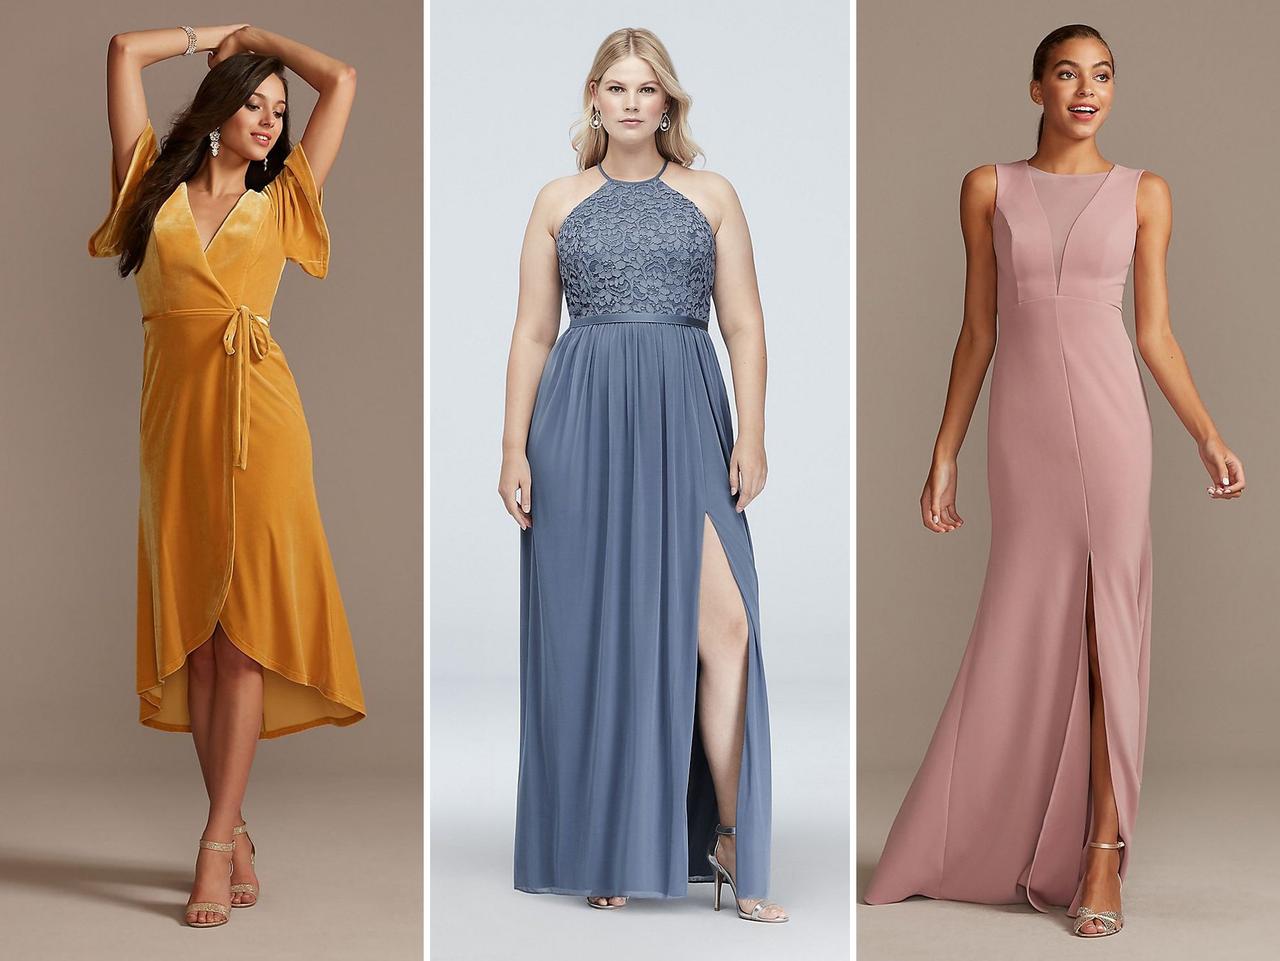 Where To Buy Bridesmaid Dresses Online With Confidence